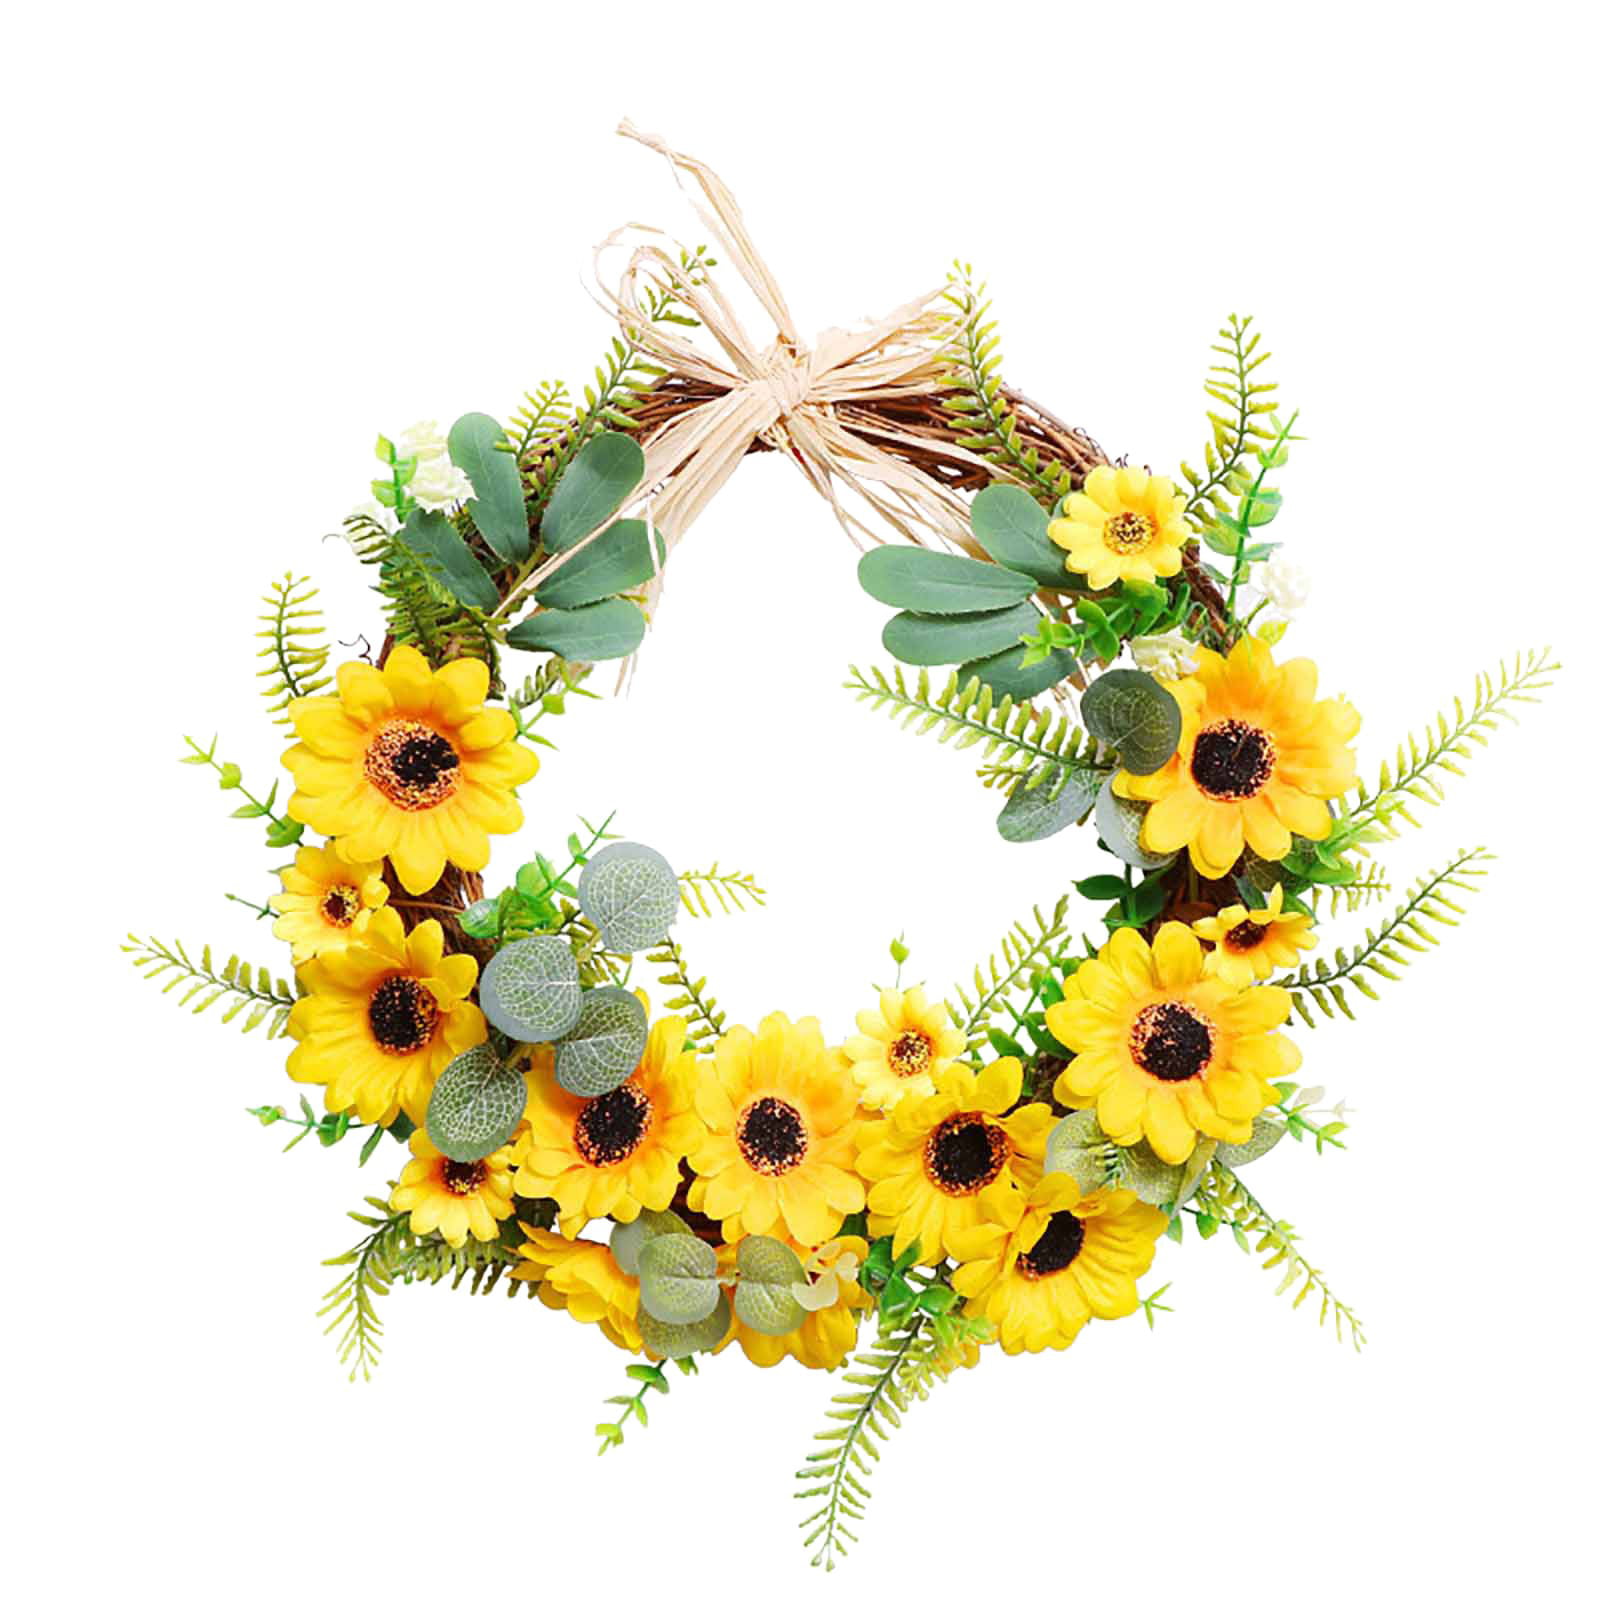 17 Inch Sunflowers Blossom Welcome Spring Front Door Wreath Artificial Flower Floral Twig Door Wreath Door Wall Window Hanging Artificial Sunflowers Flower Wreath for Home Party Festivals Decoration